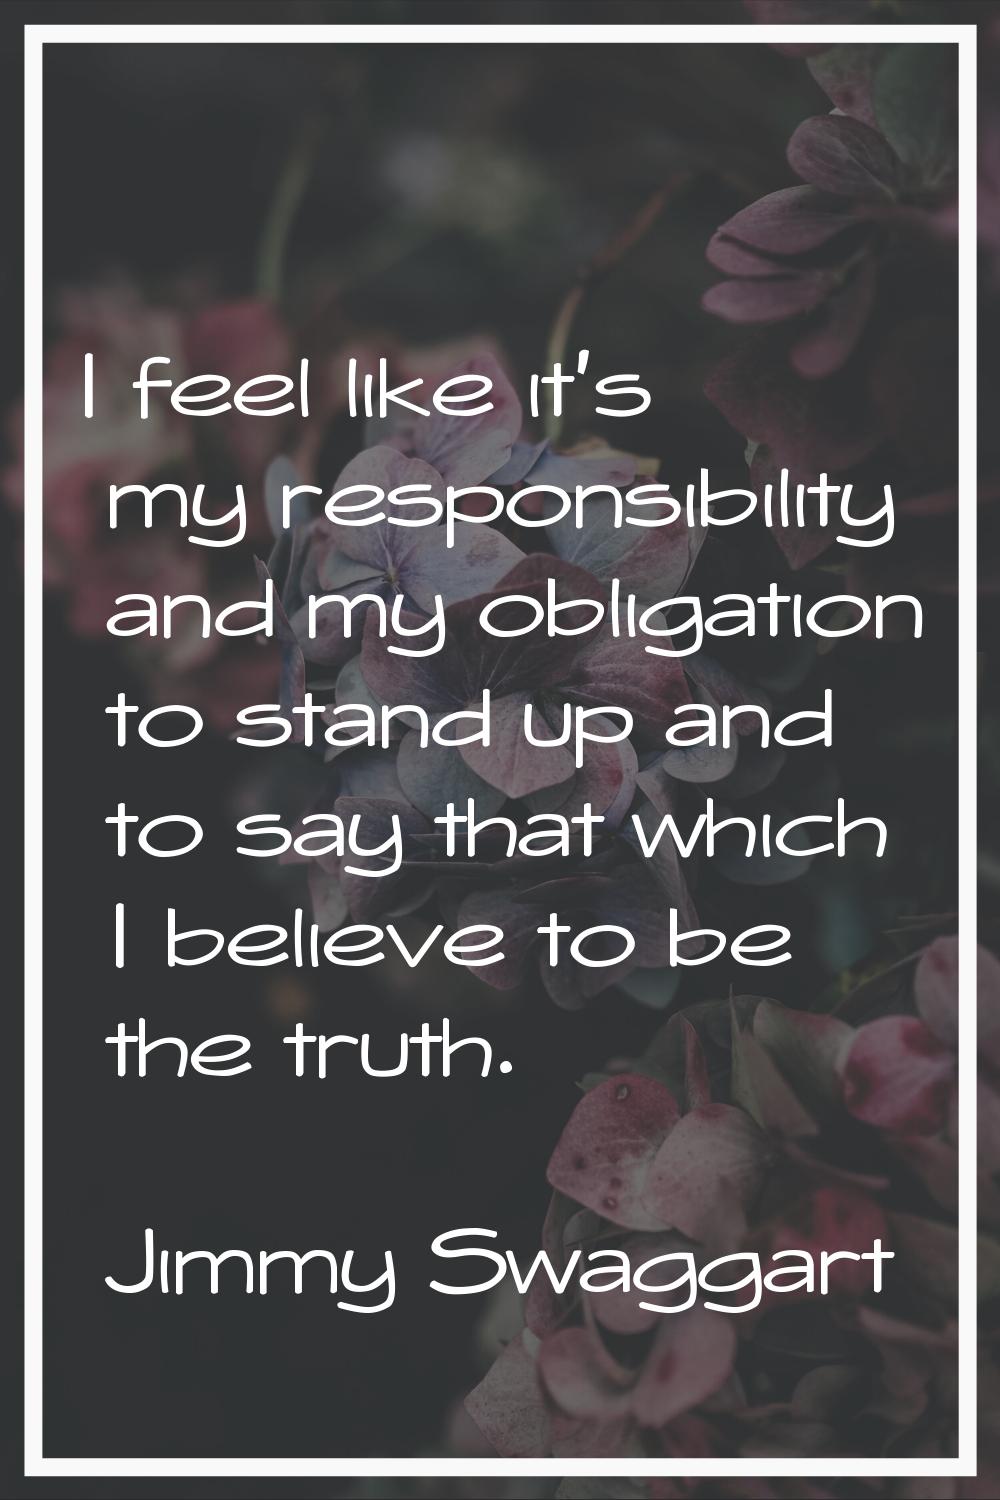 I feel like it's my responsibility and my obligation to stand up and to say that which I believe to